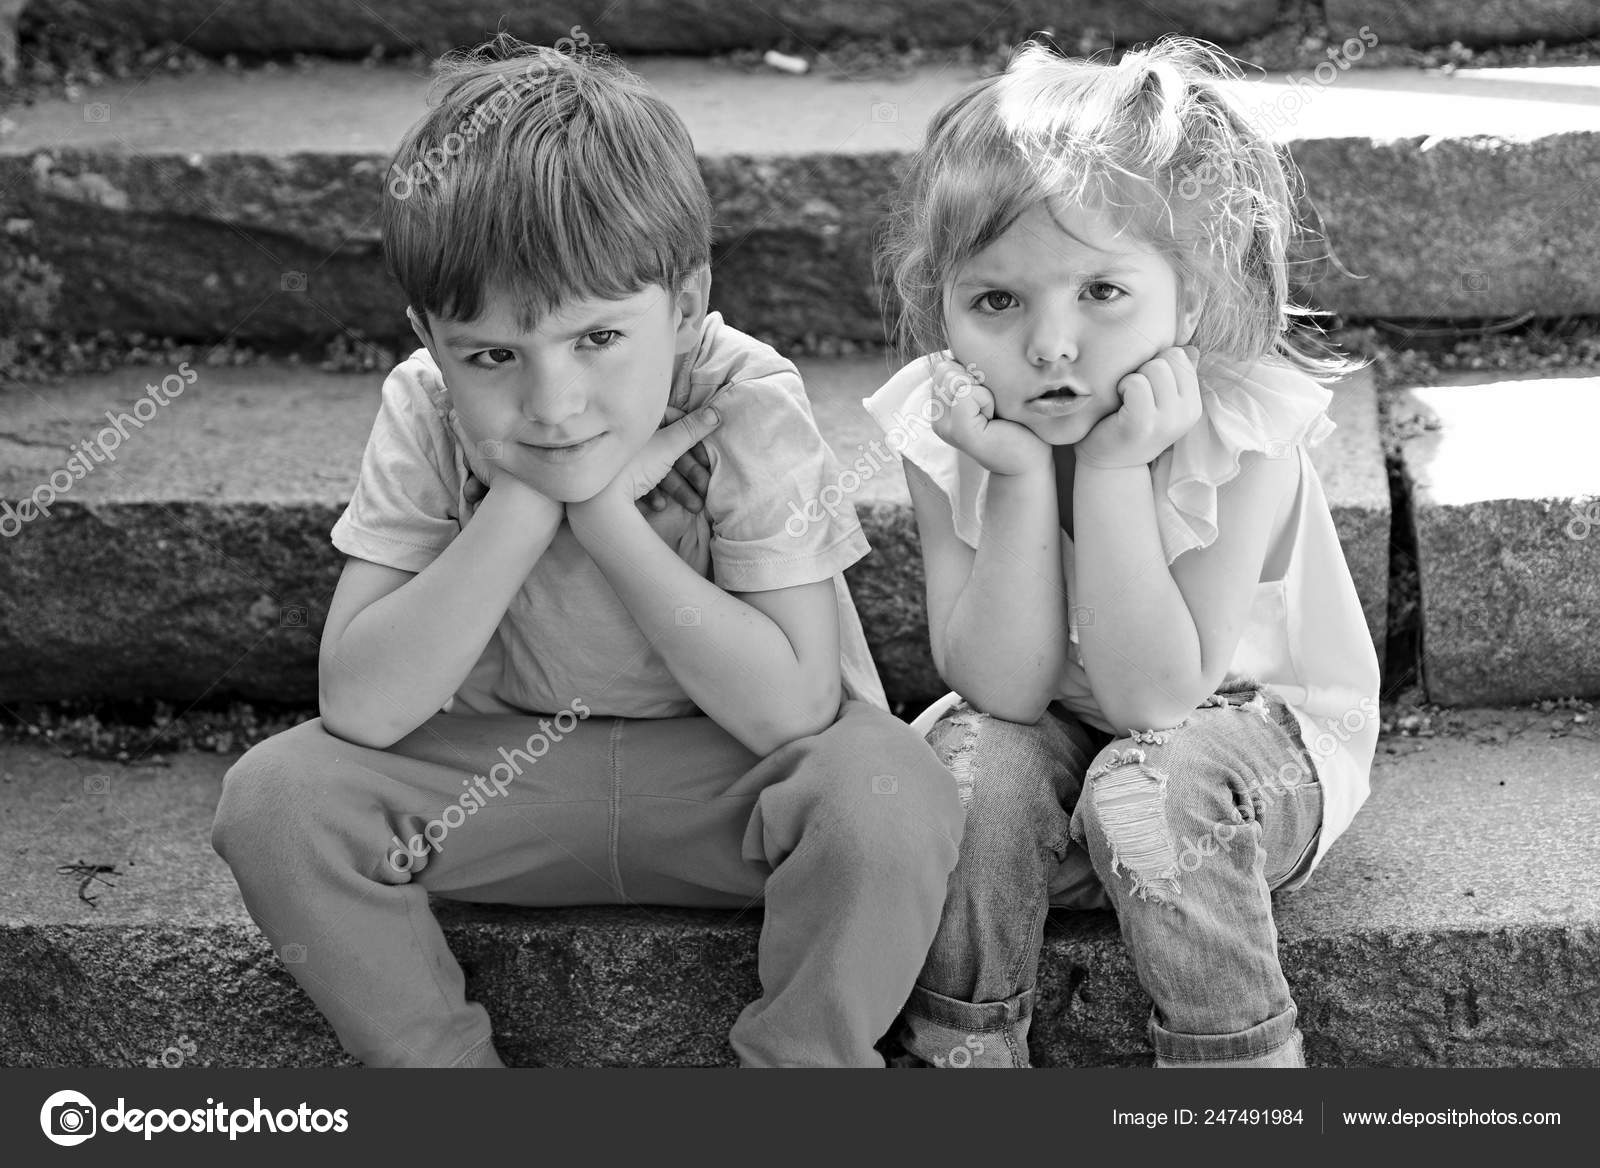 Summer Holiday And Vacation Couple Of Little Children Boy And Girl Childhood First Love Best Friends Friendship And Family Values Small Girl And Boy On Stairs Relations Misunderstanding Stock Photo By C Tverdohlib Com